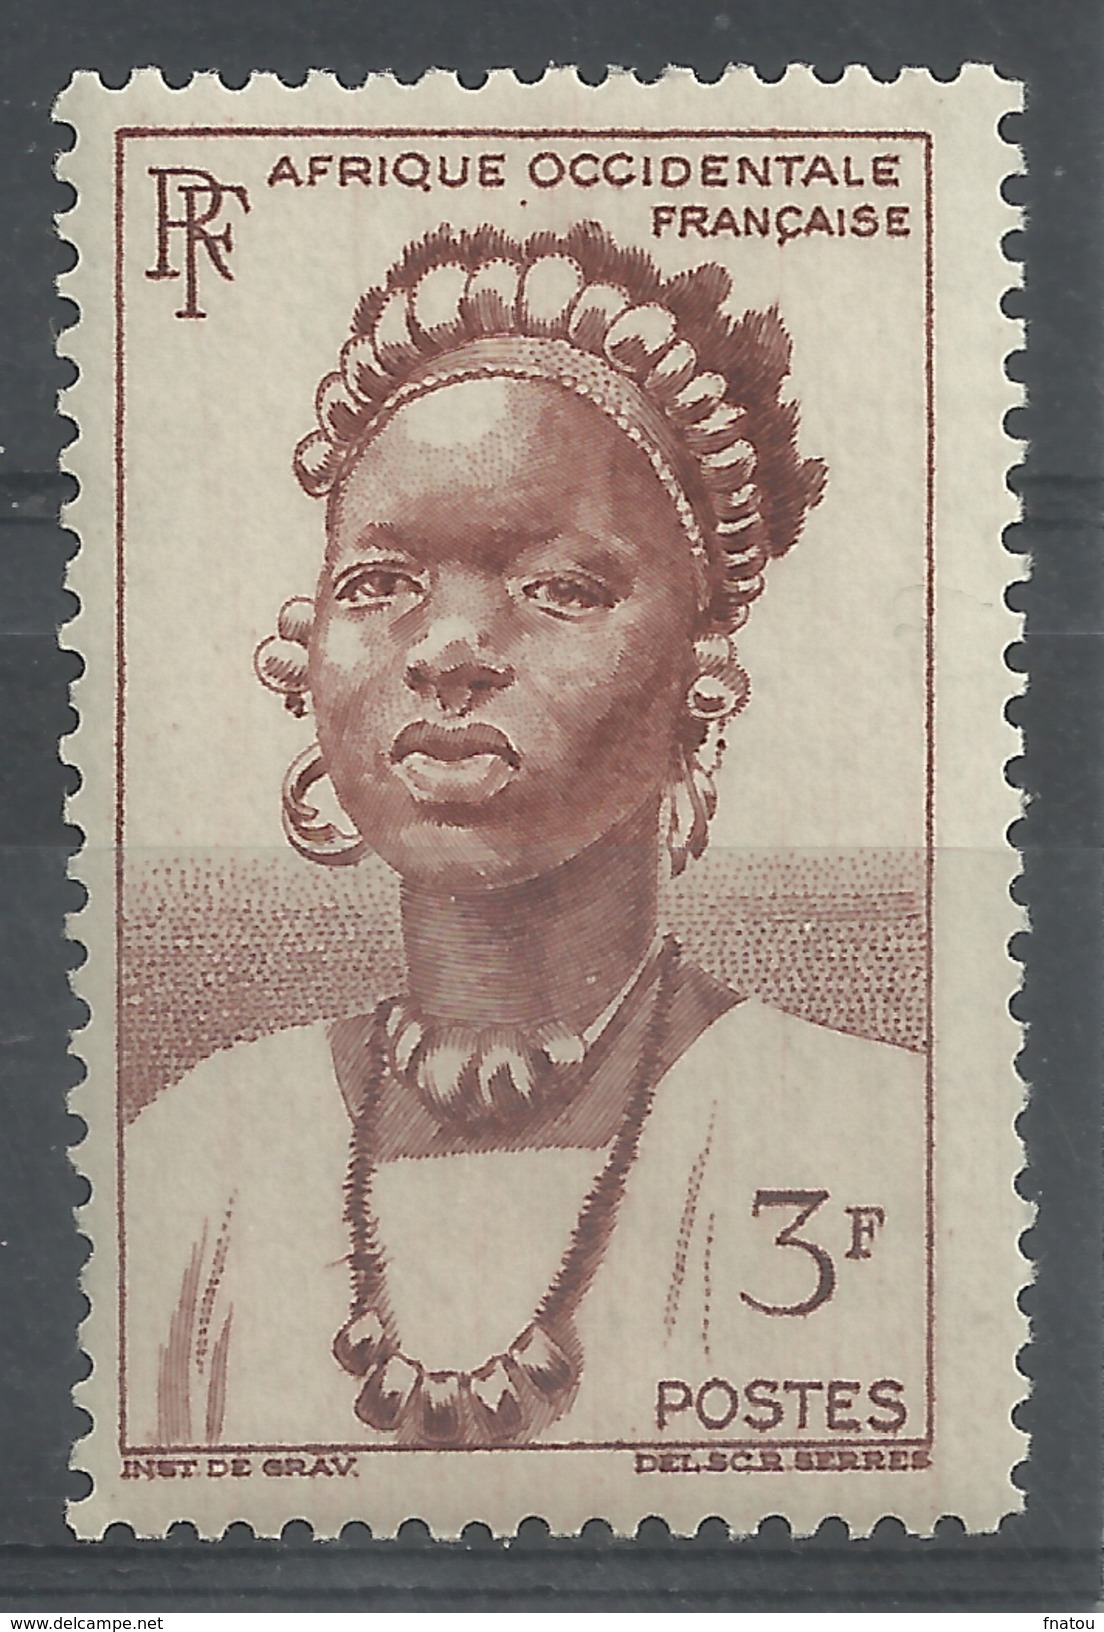 French West Africa (AOF), Togolese Woman, Without "TOGO", 1948, MH VF - Unused Stamps